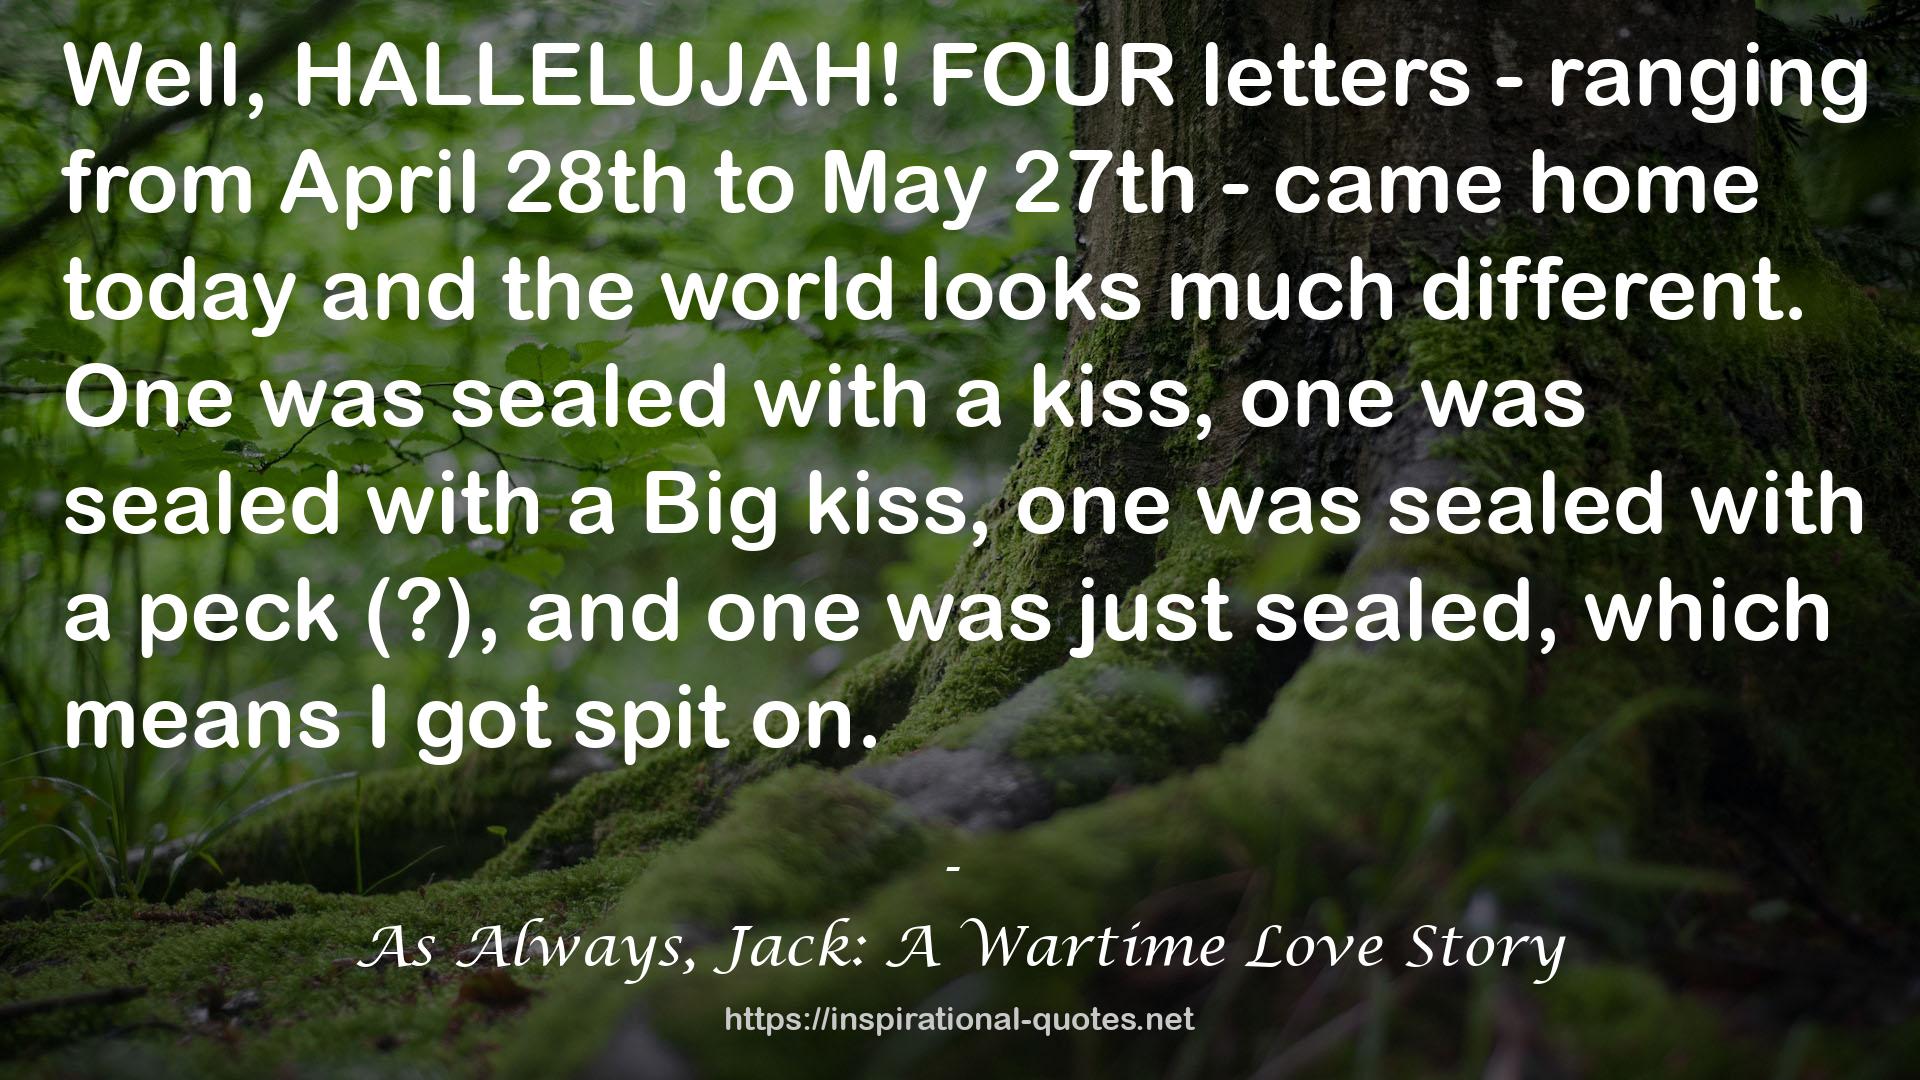 As Always, Jack: A Wartime Love Story QUOTES